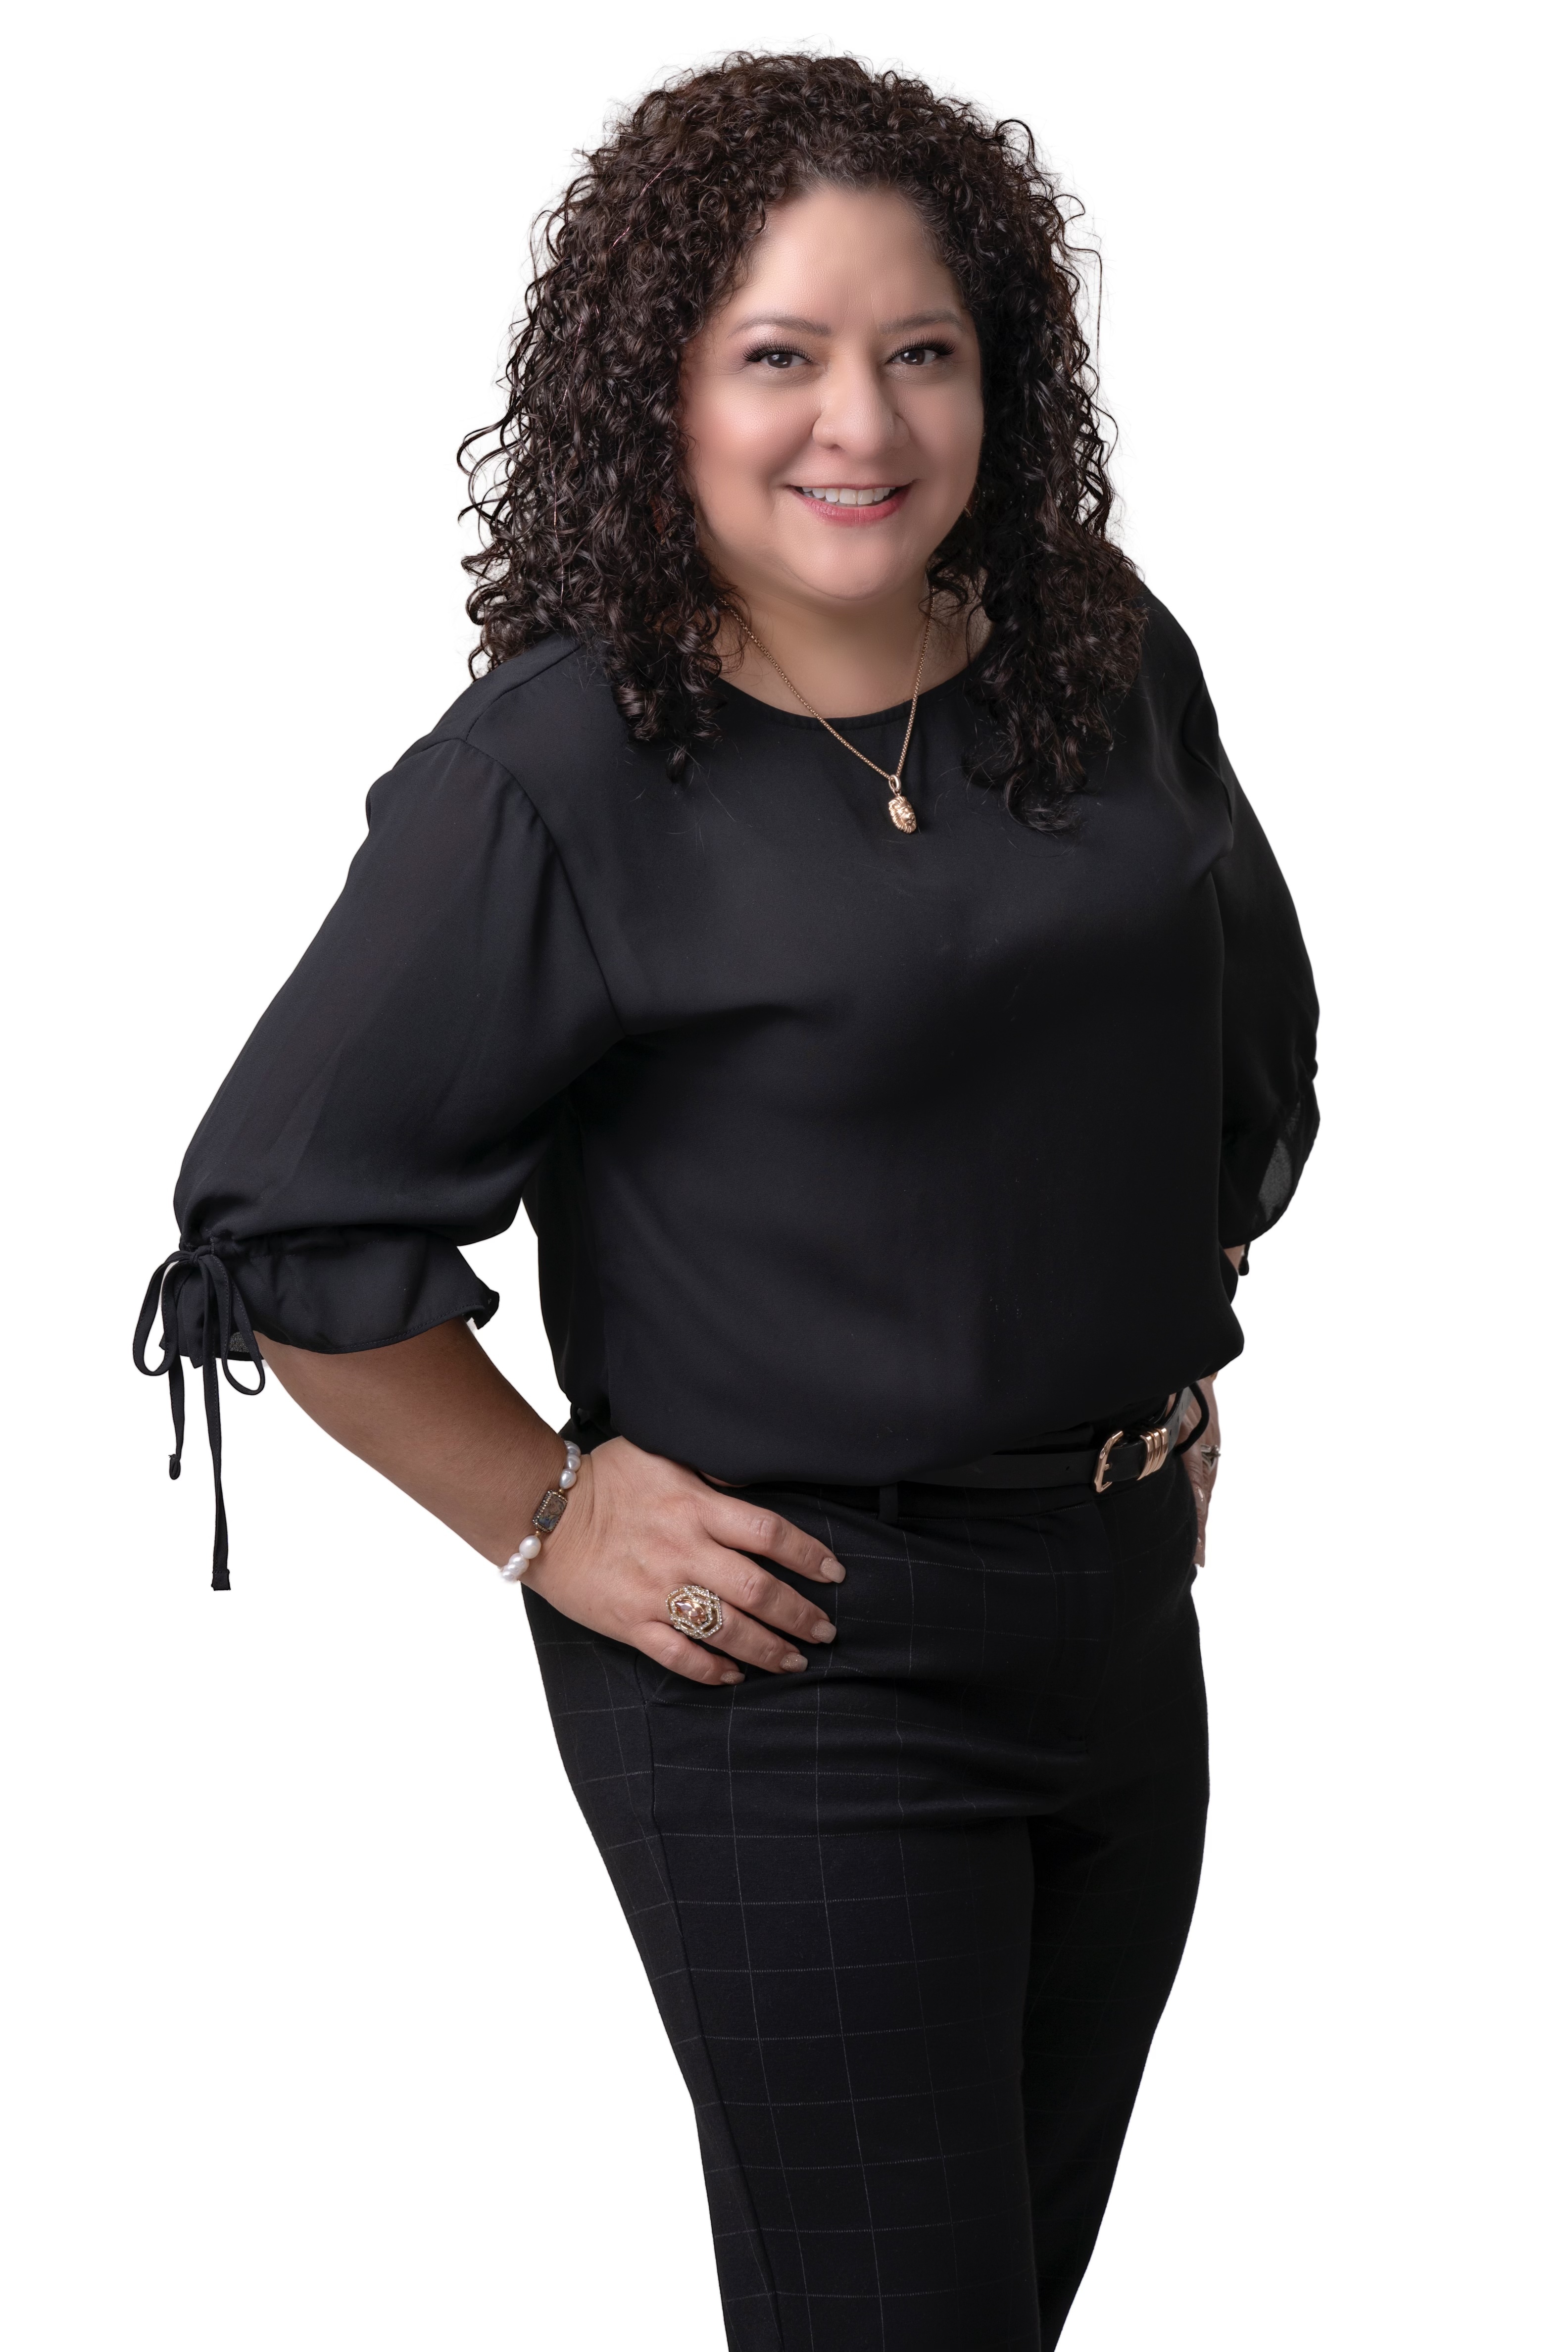 Leticia Hernandez,  in Mission, Lions Gate Realty